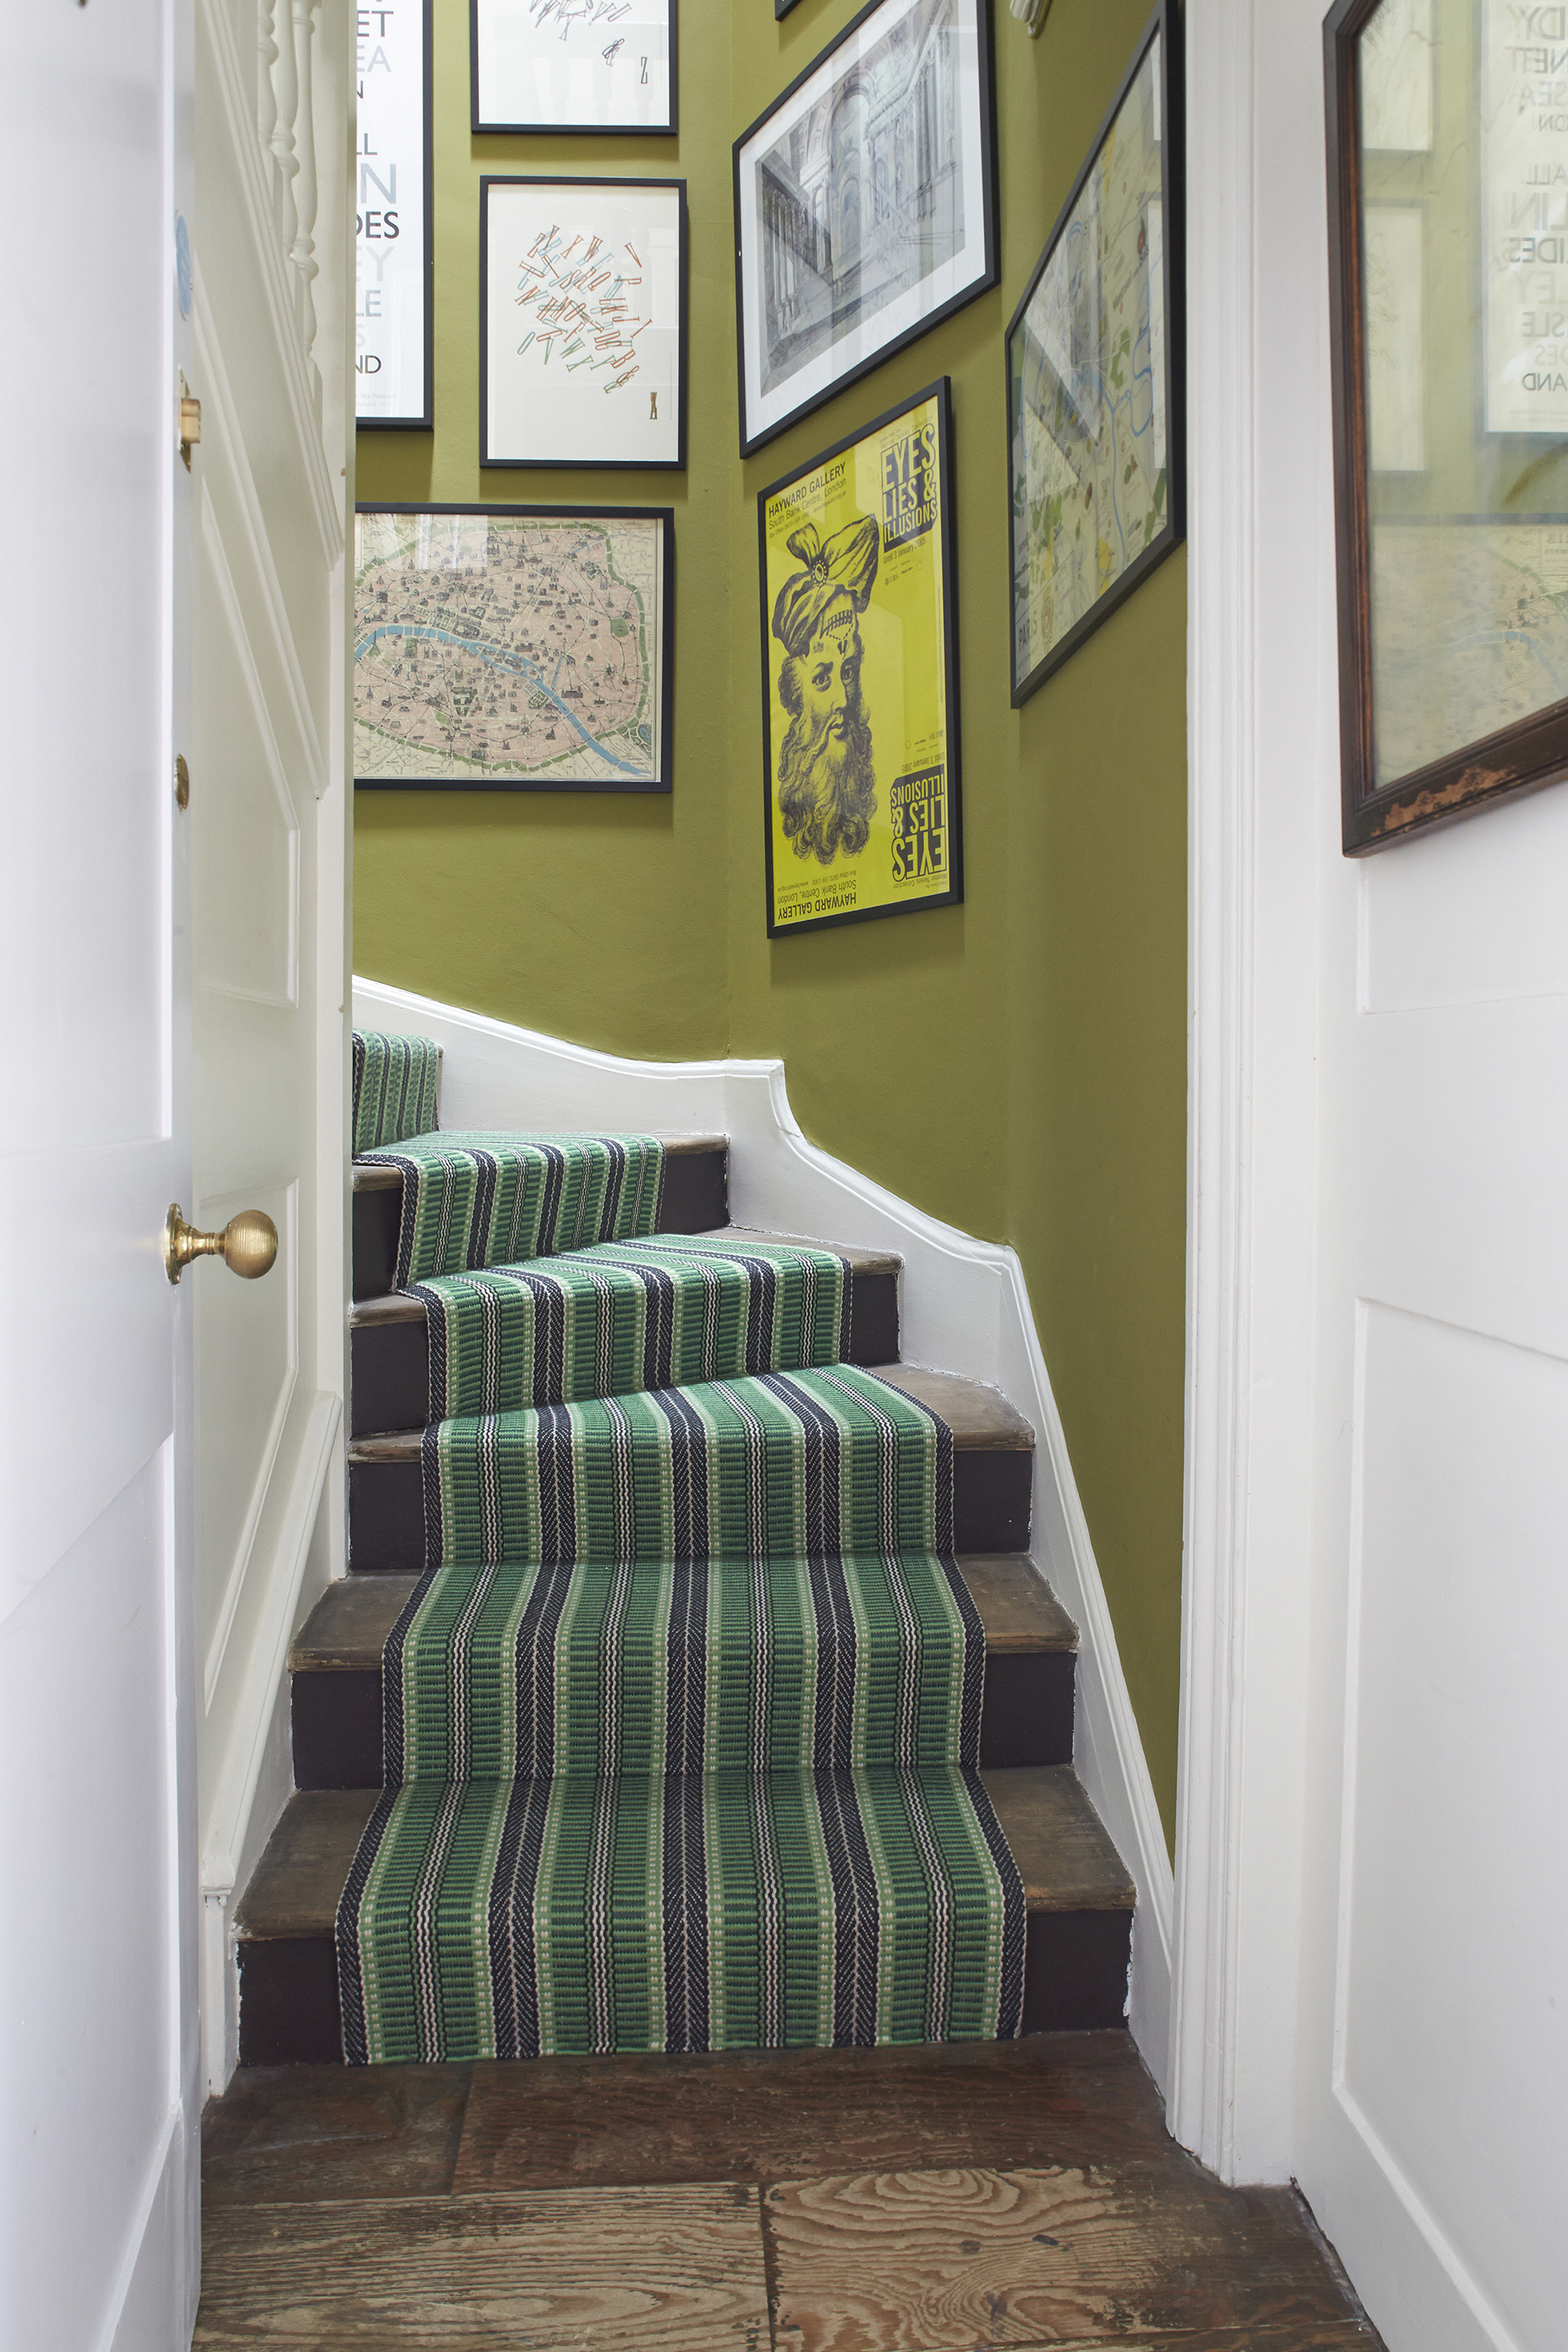 Striped green runner up loft conversion stairs, next to a green wall with artwork on it